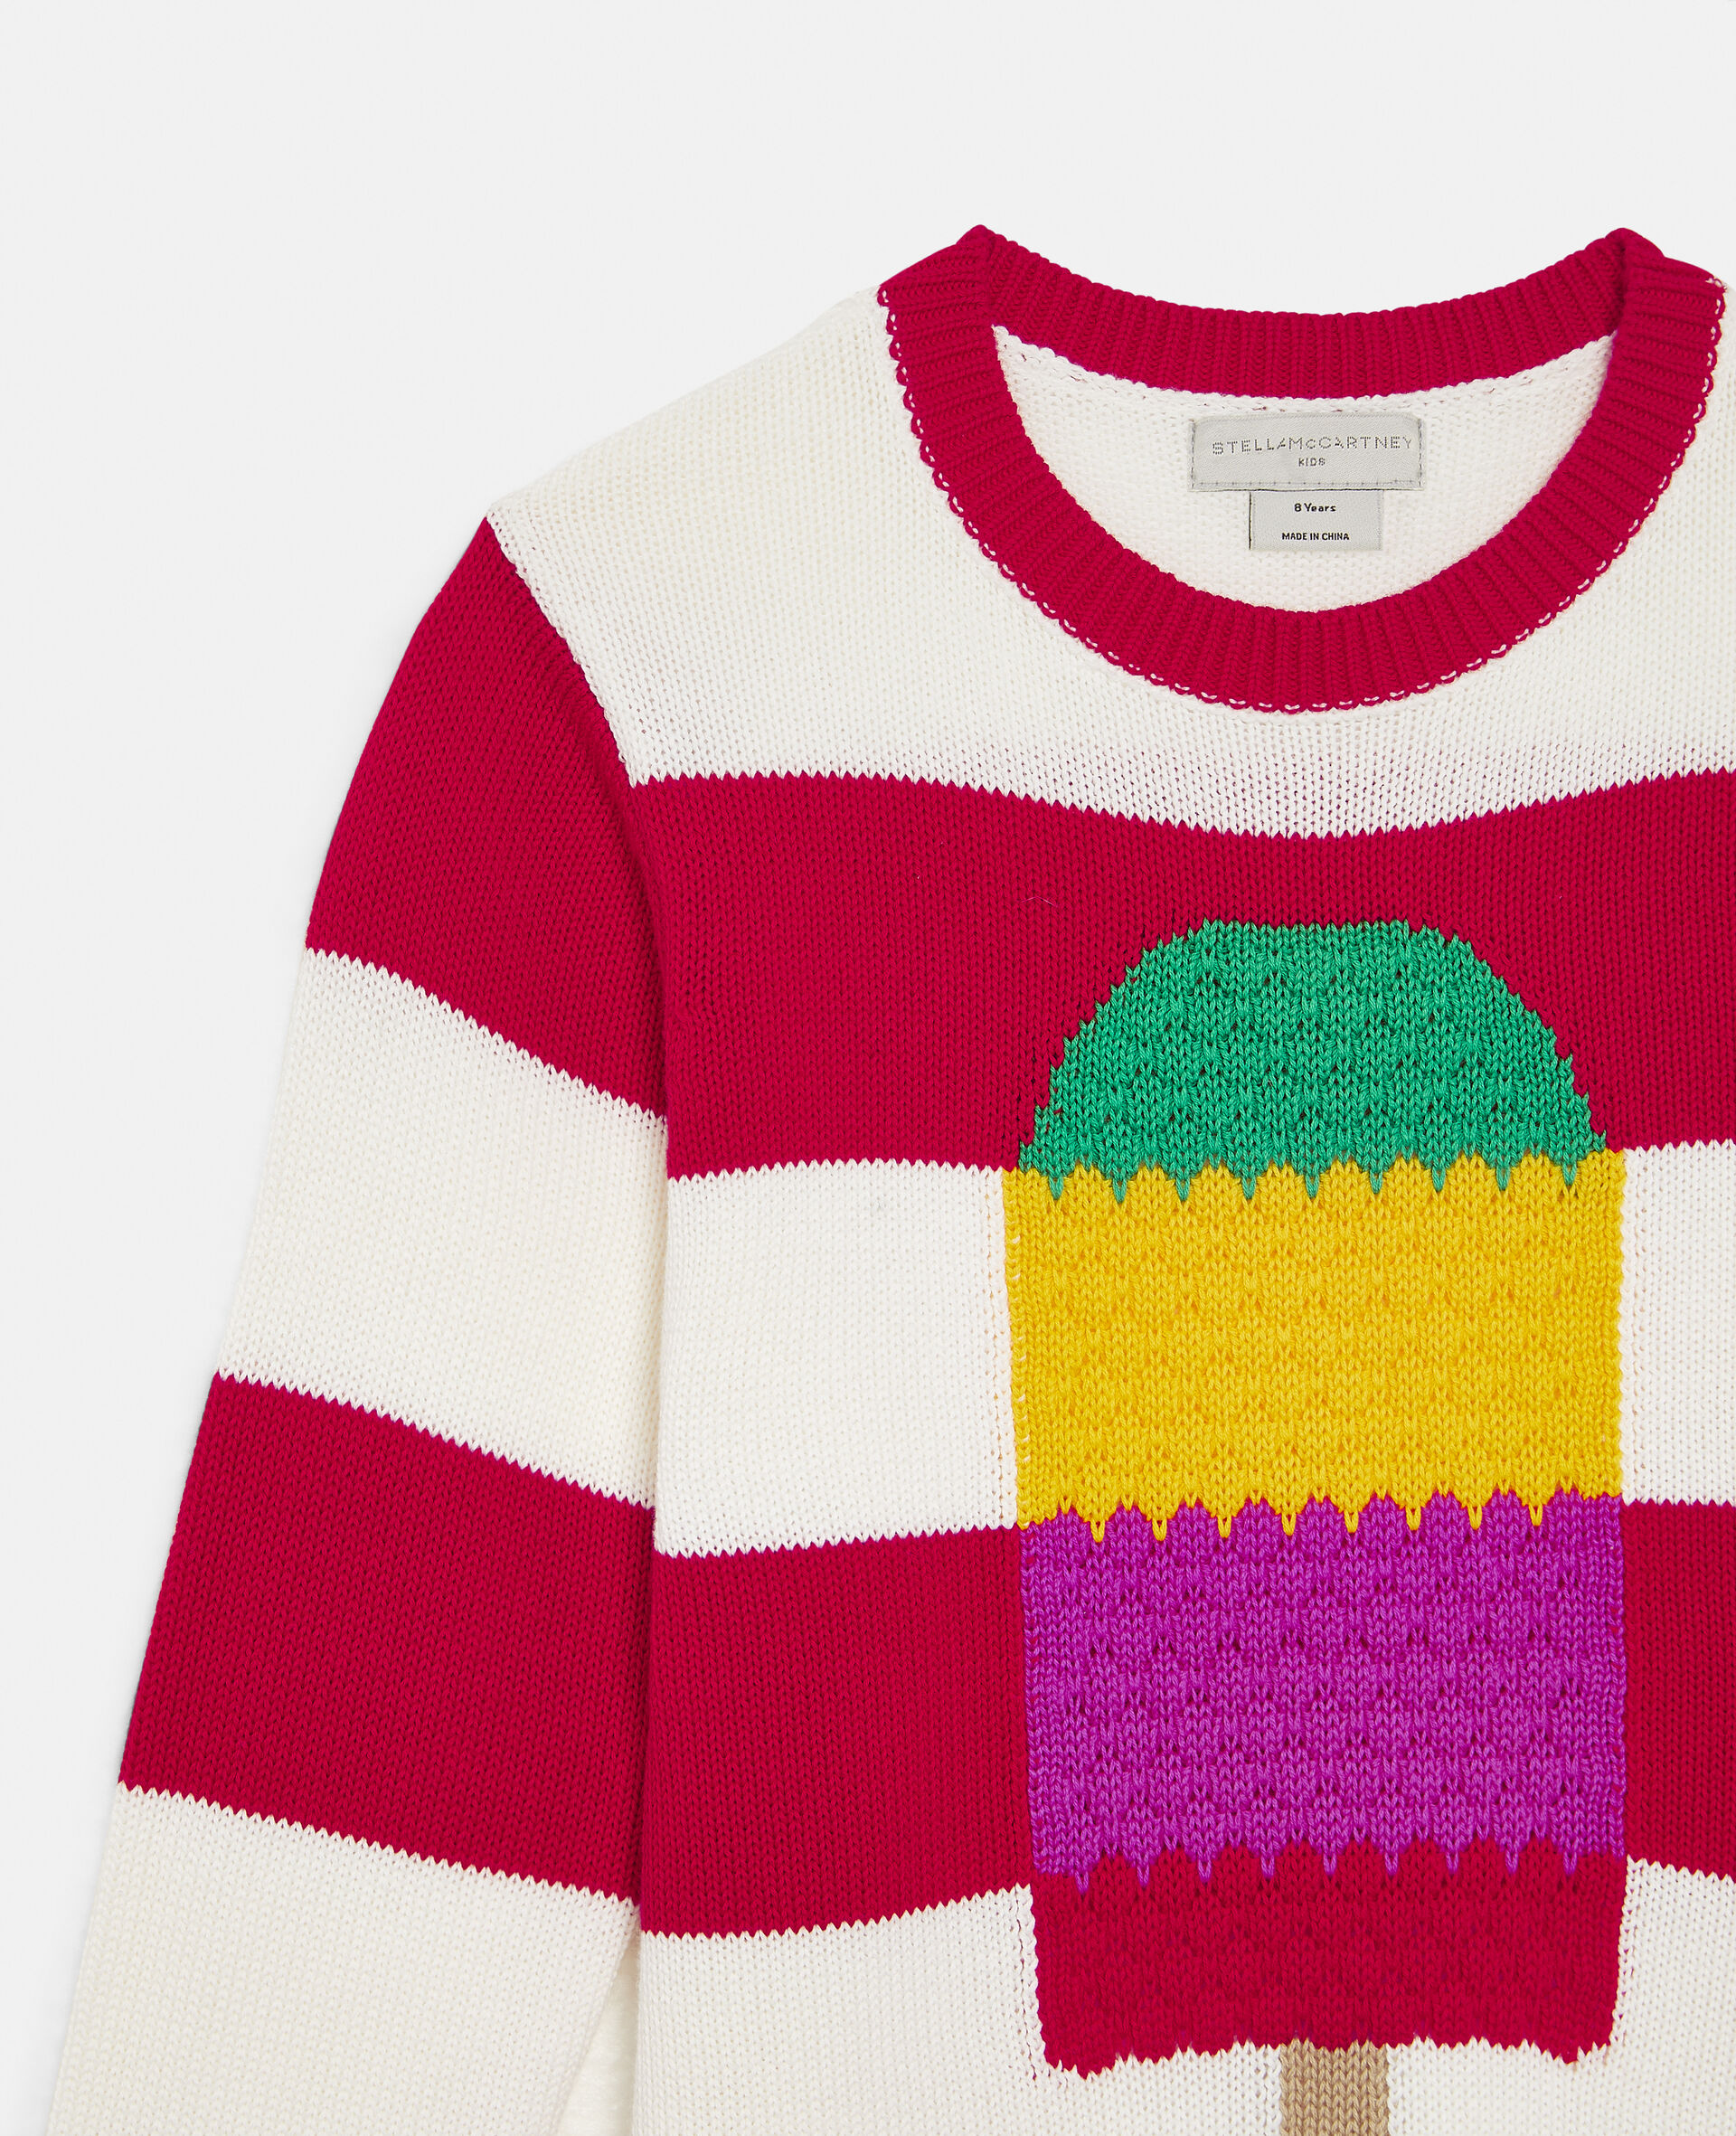 Popsicle Intarsia Knit Jumper-Multicolour-large image number 1